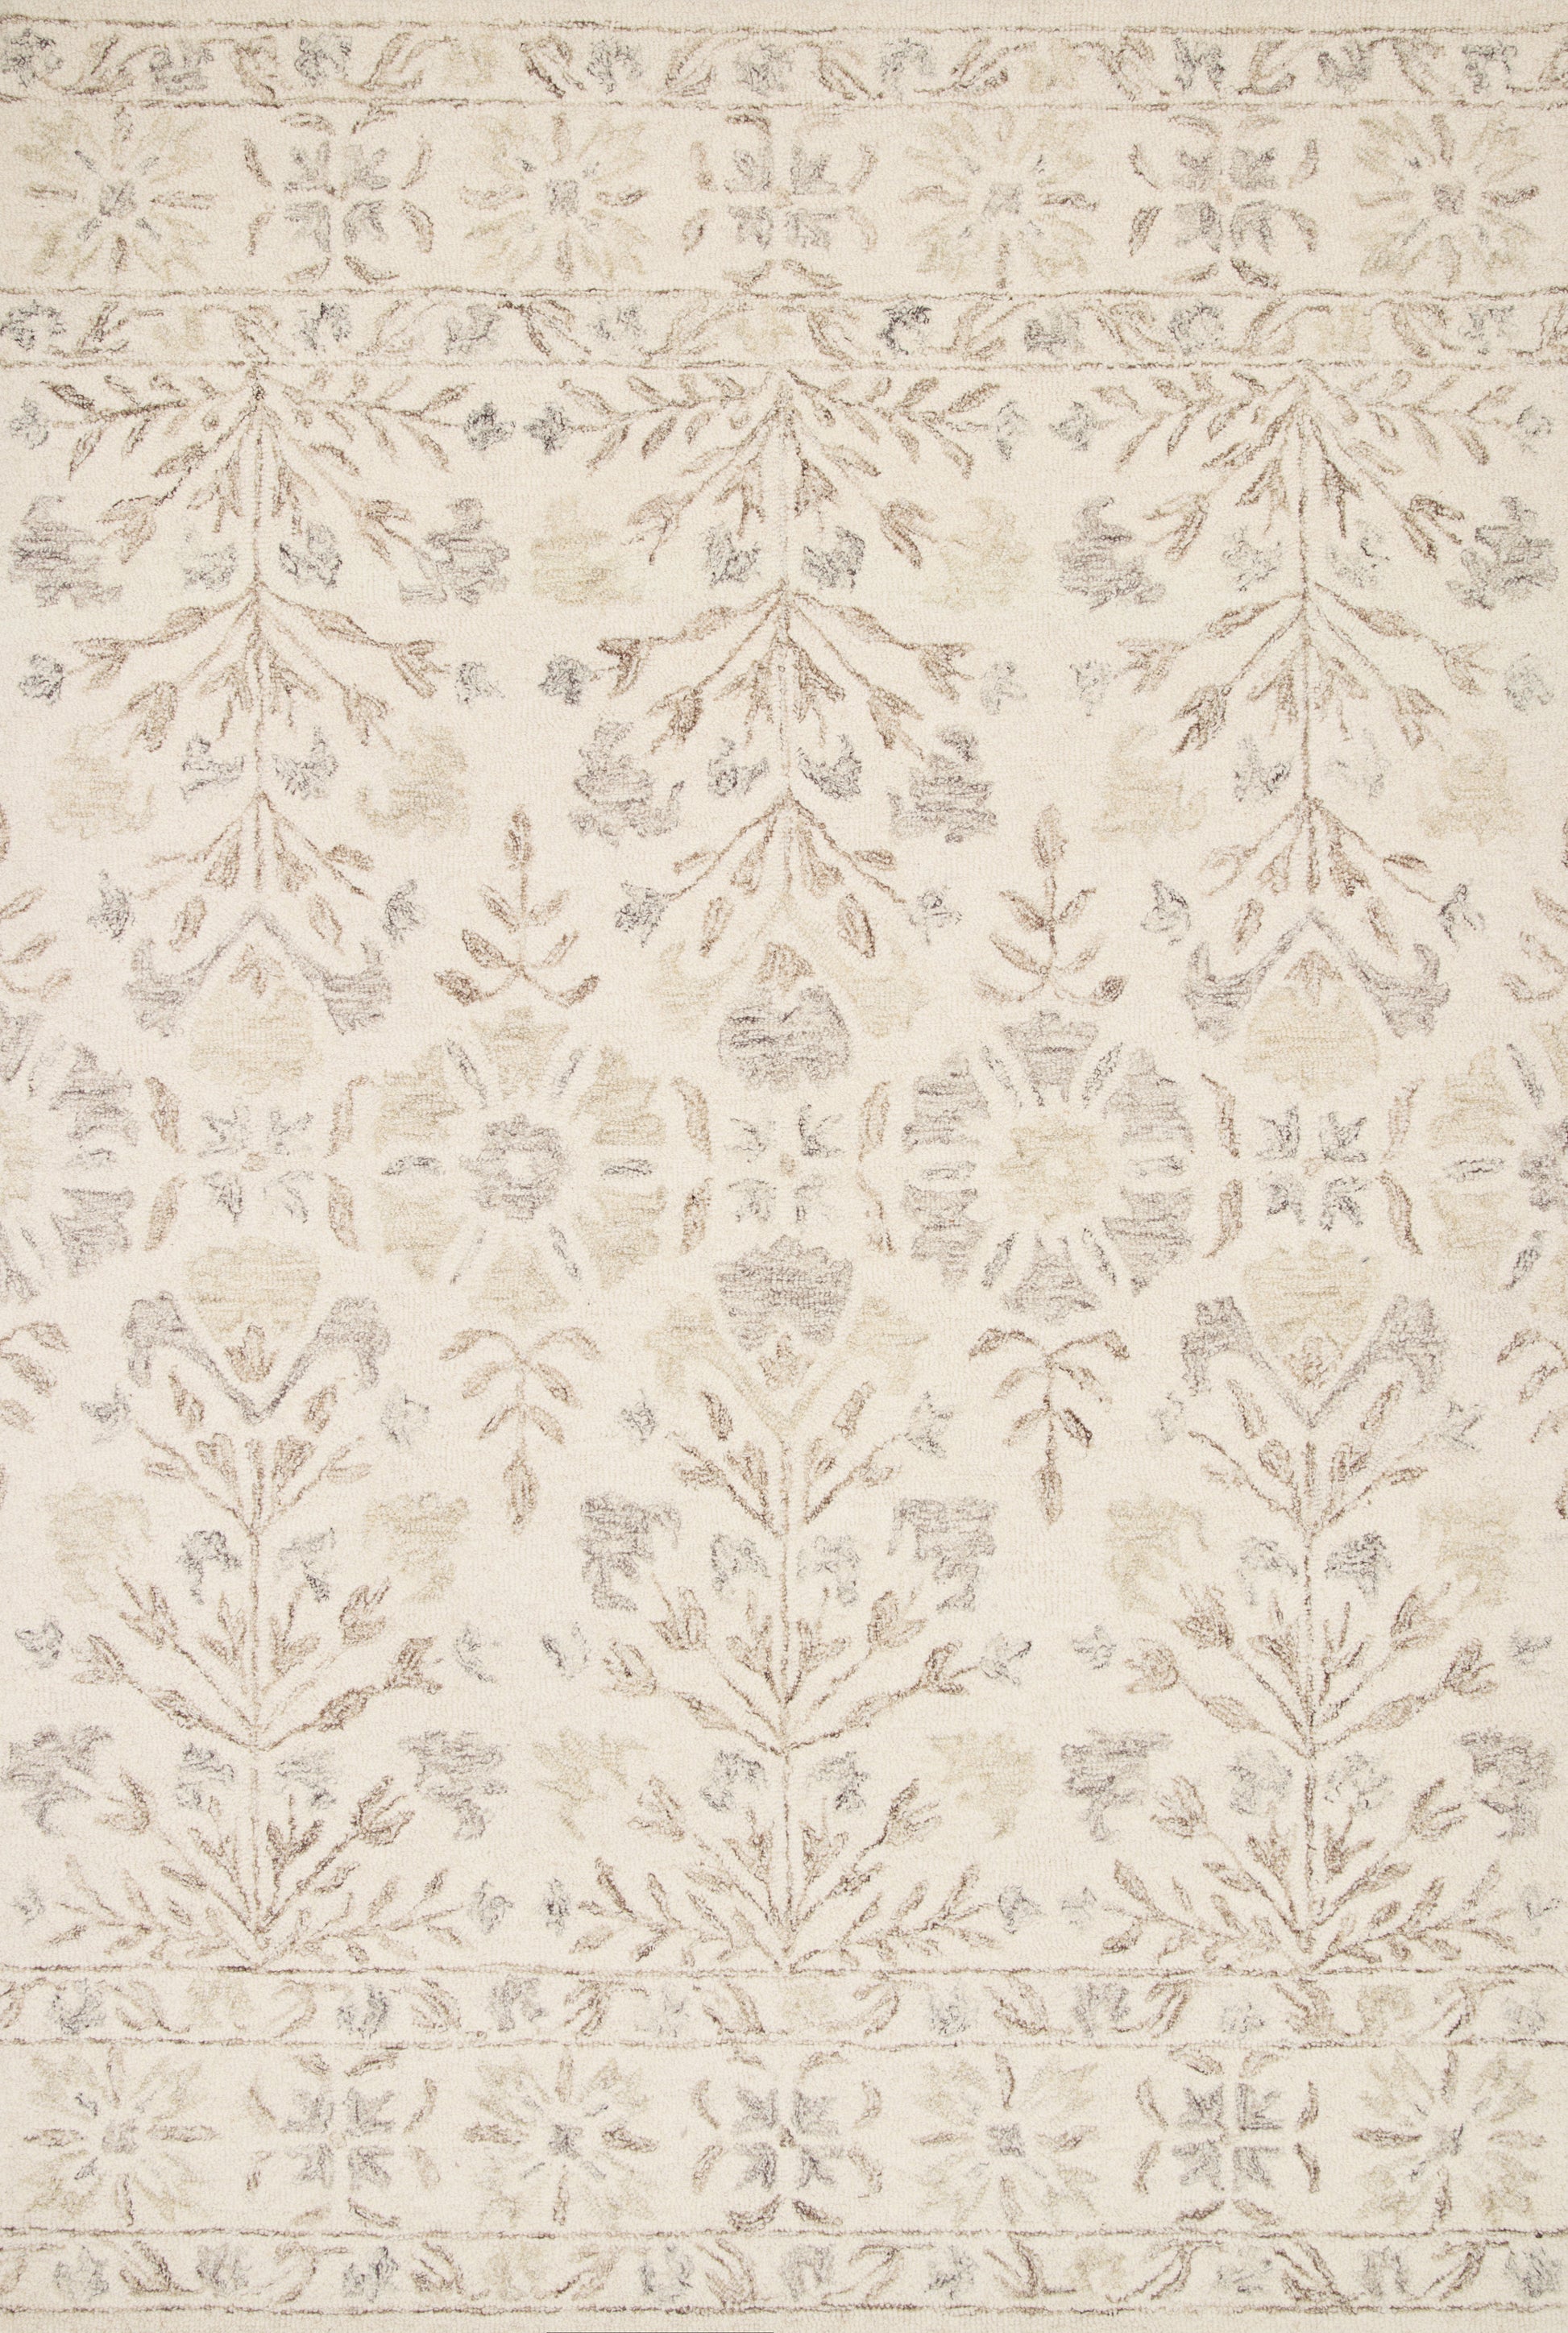 A picture of Loloi's Norabel rug, in style NOR-02, color Ivory / Neutral